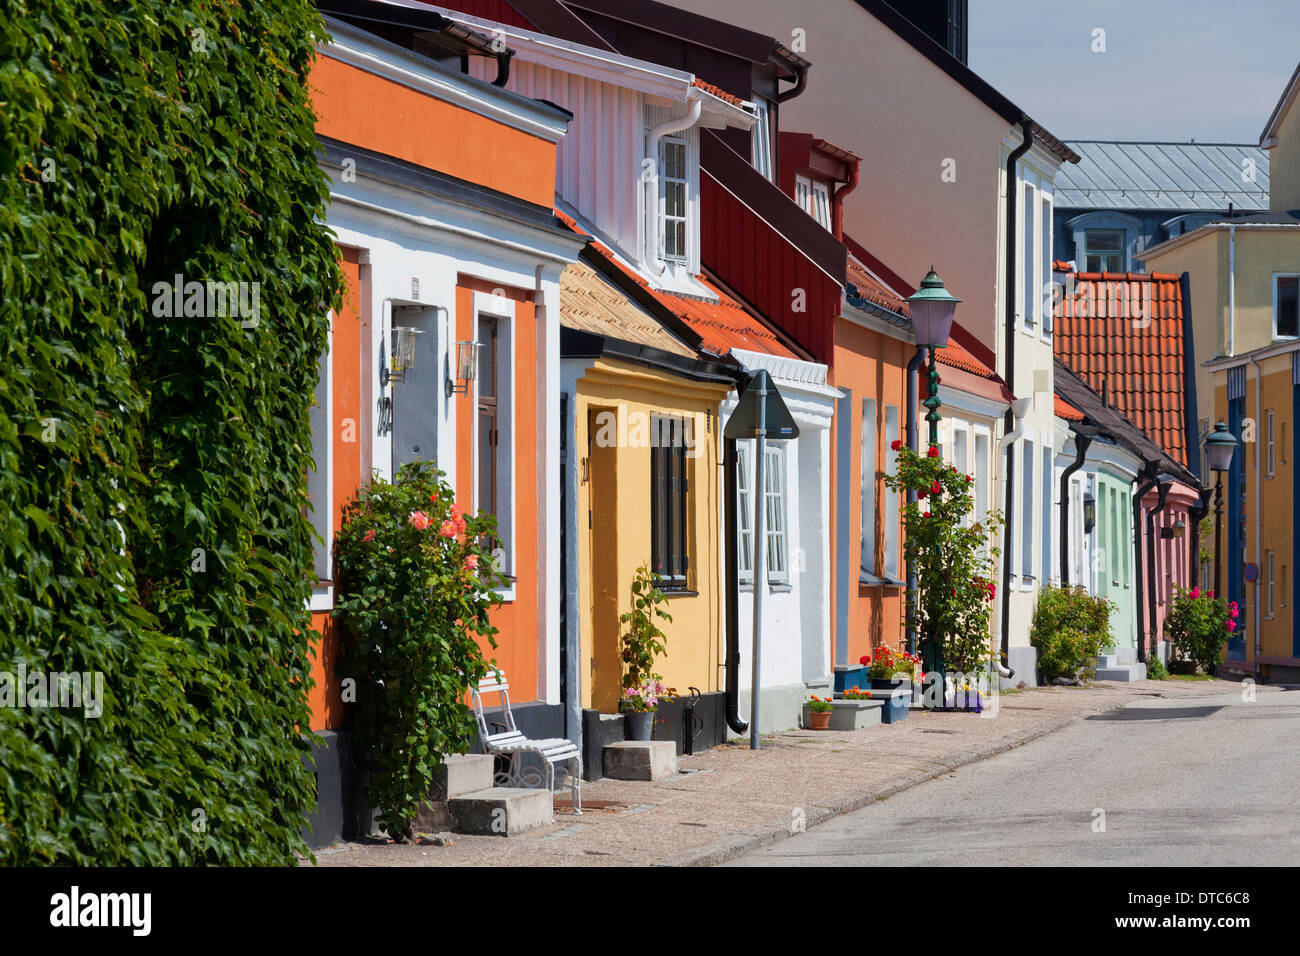 Historical and colourful houses with facades decorated with flowers in the town Ystad, Skåne / Scania, Sweden Stock Photo